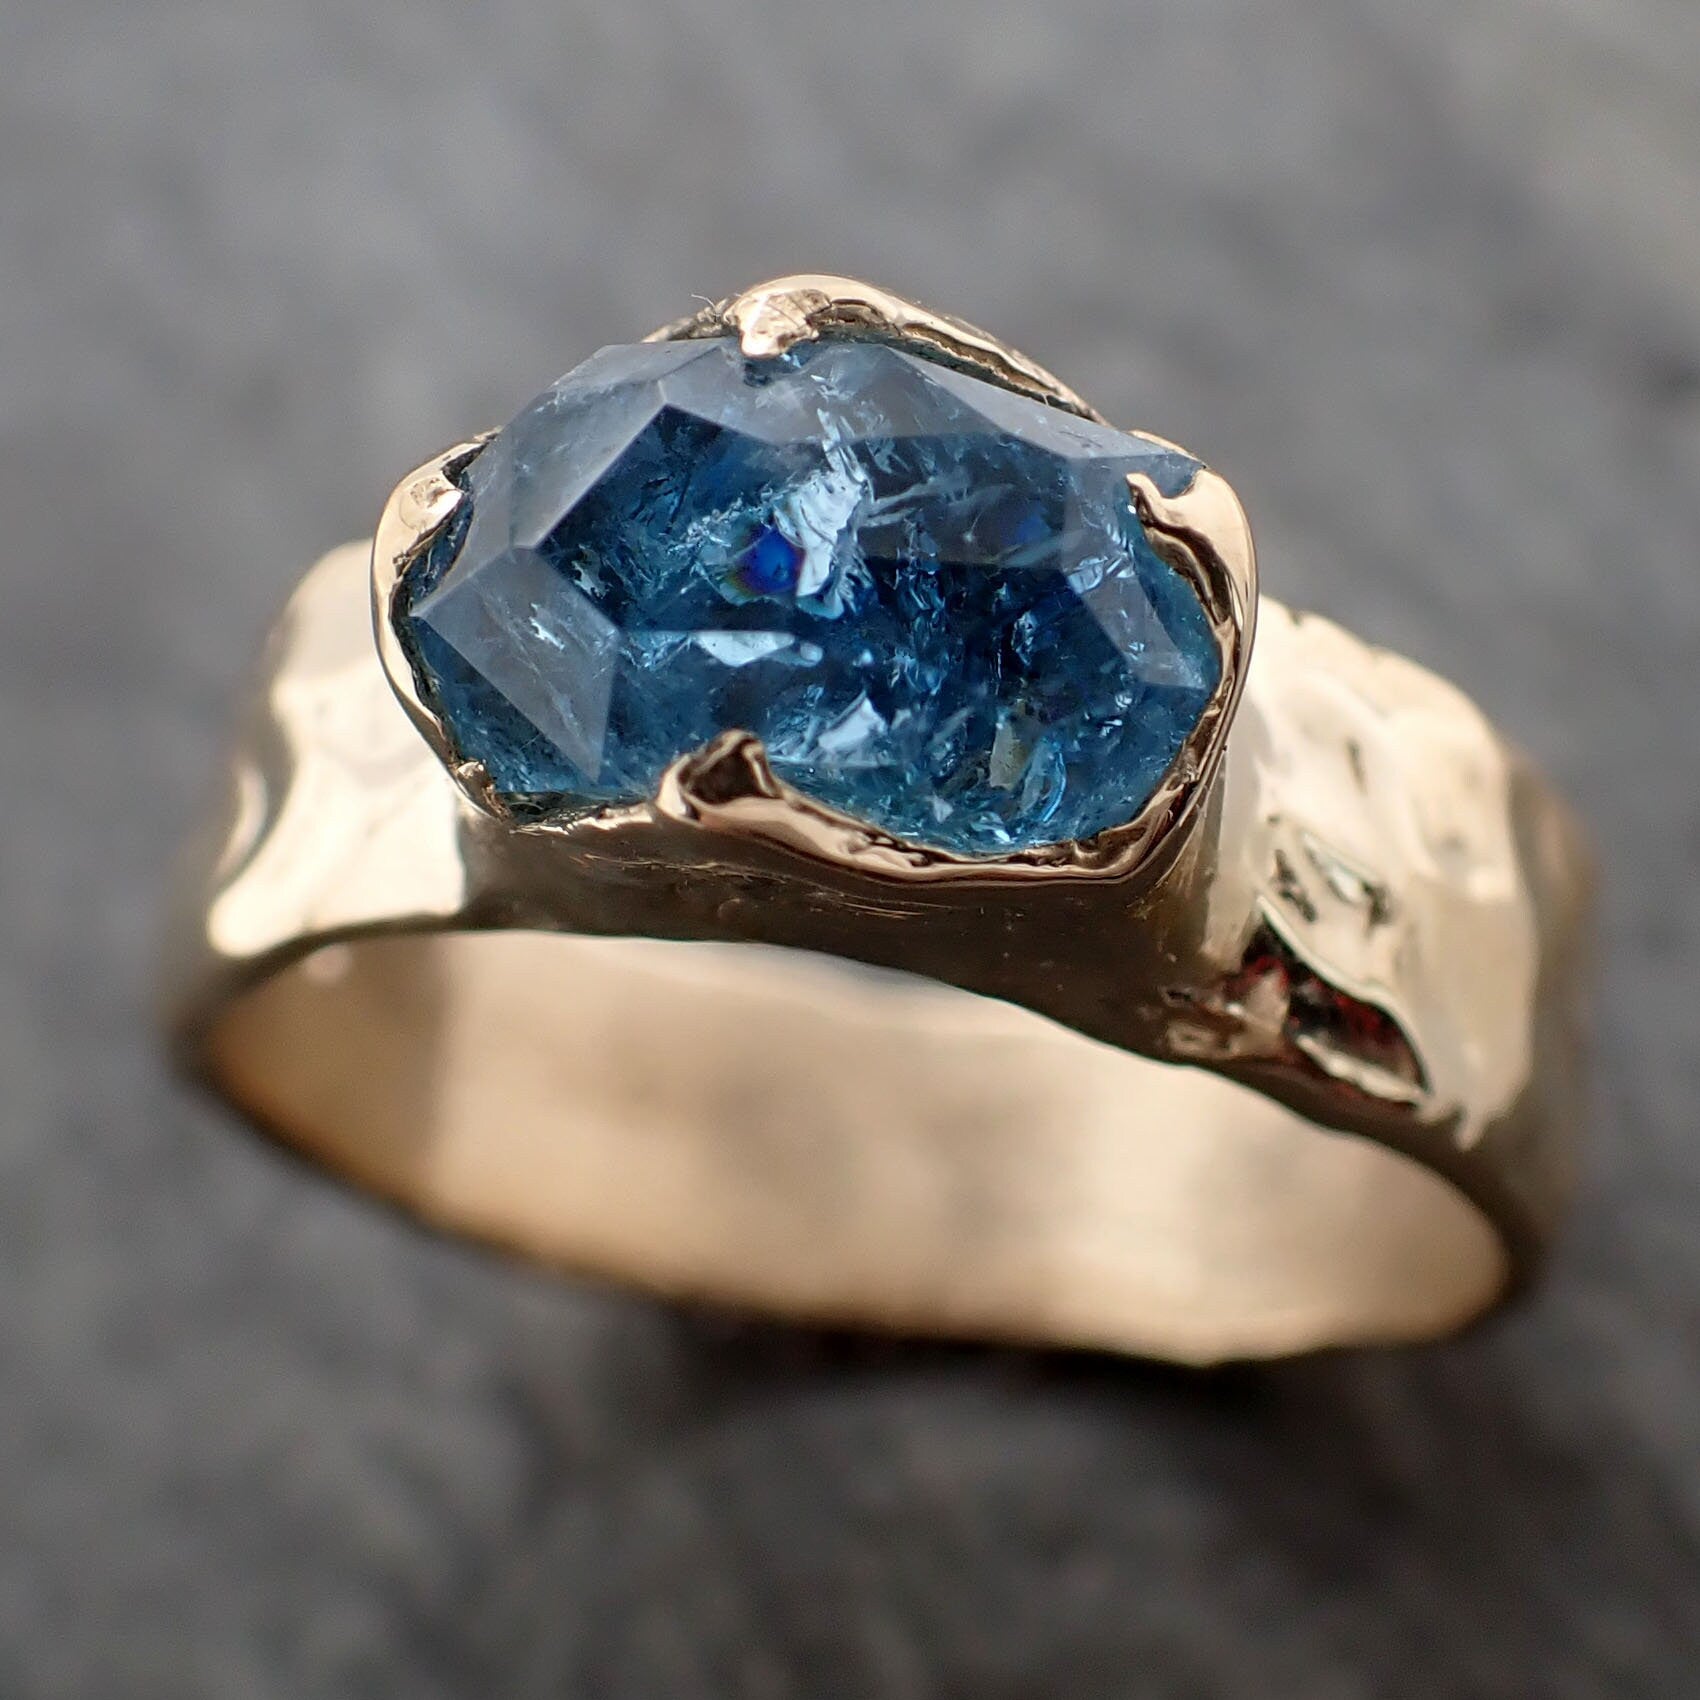 Partially faceted Aquamarine Solitaire Ring Cigar band 14k gold Custom One Of a Kind Gemstone Ring Bespoke byAngeline 3248